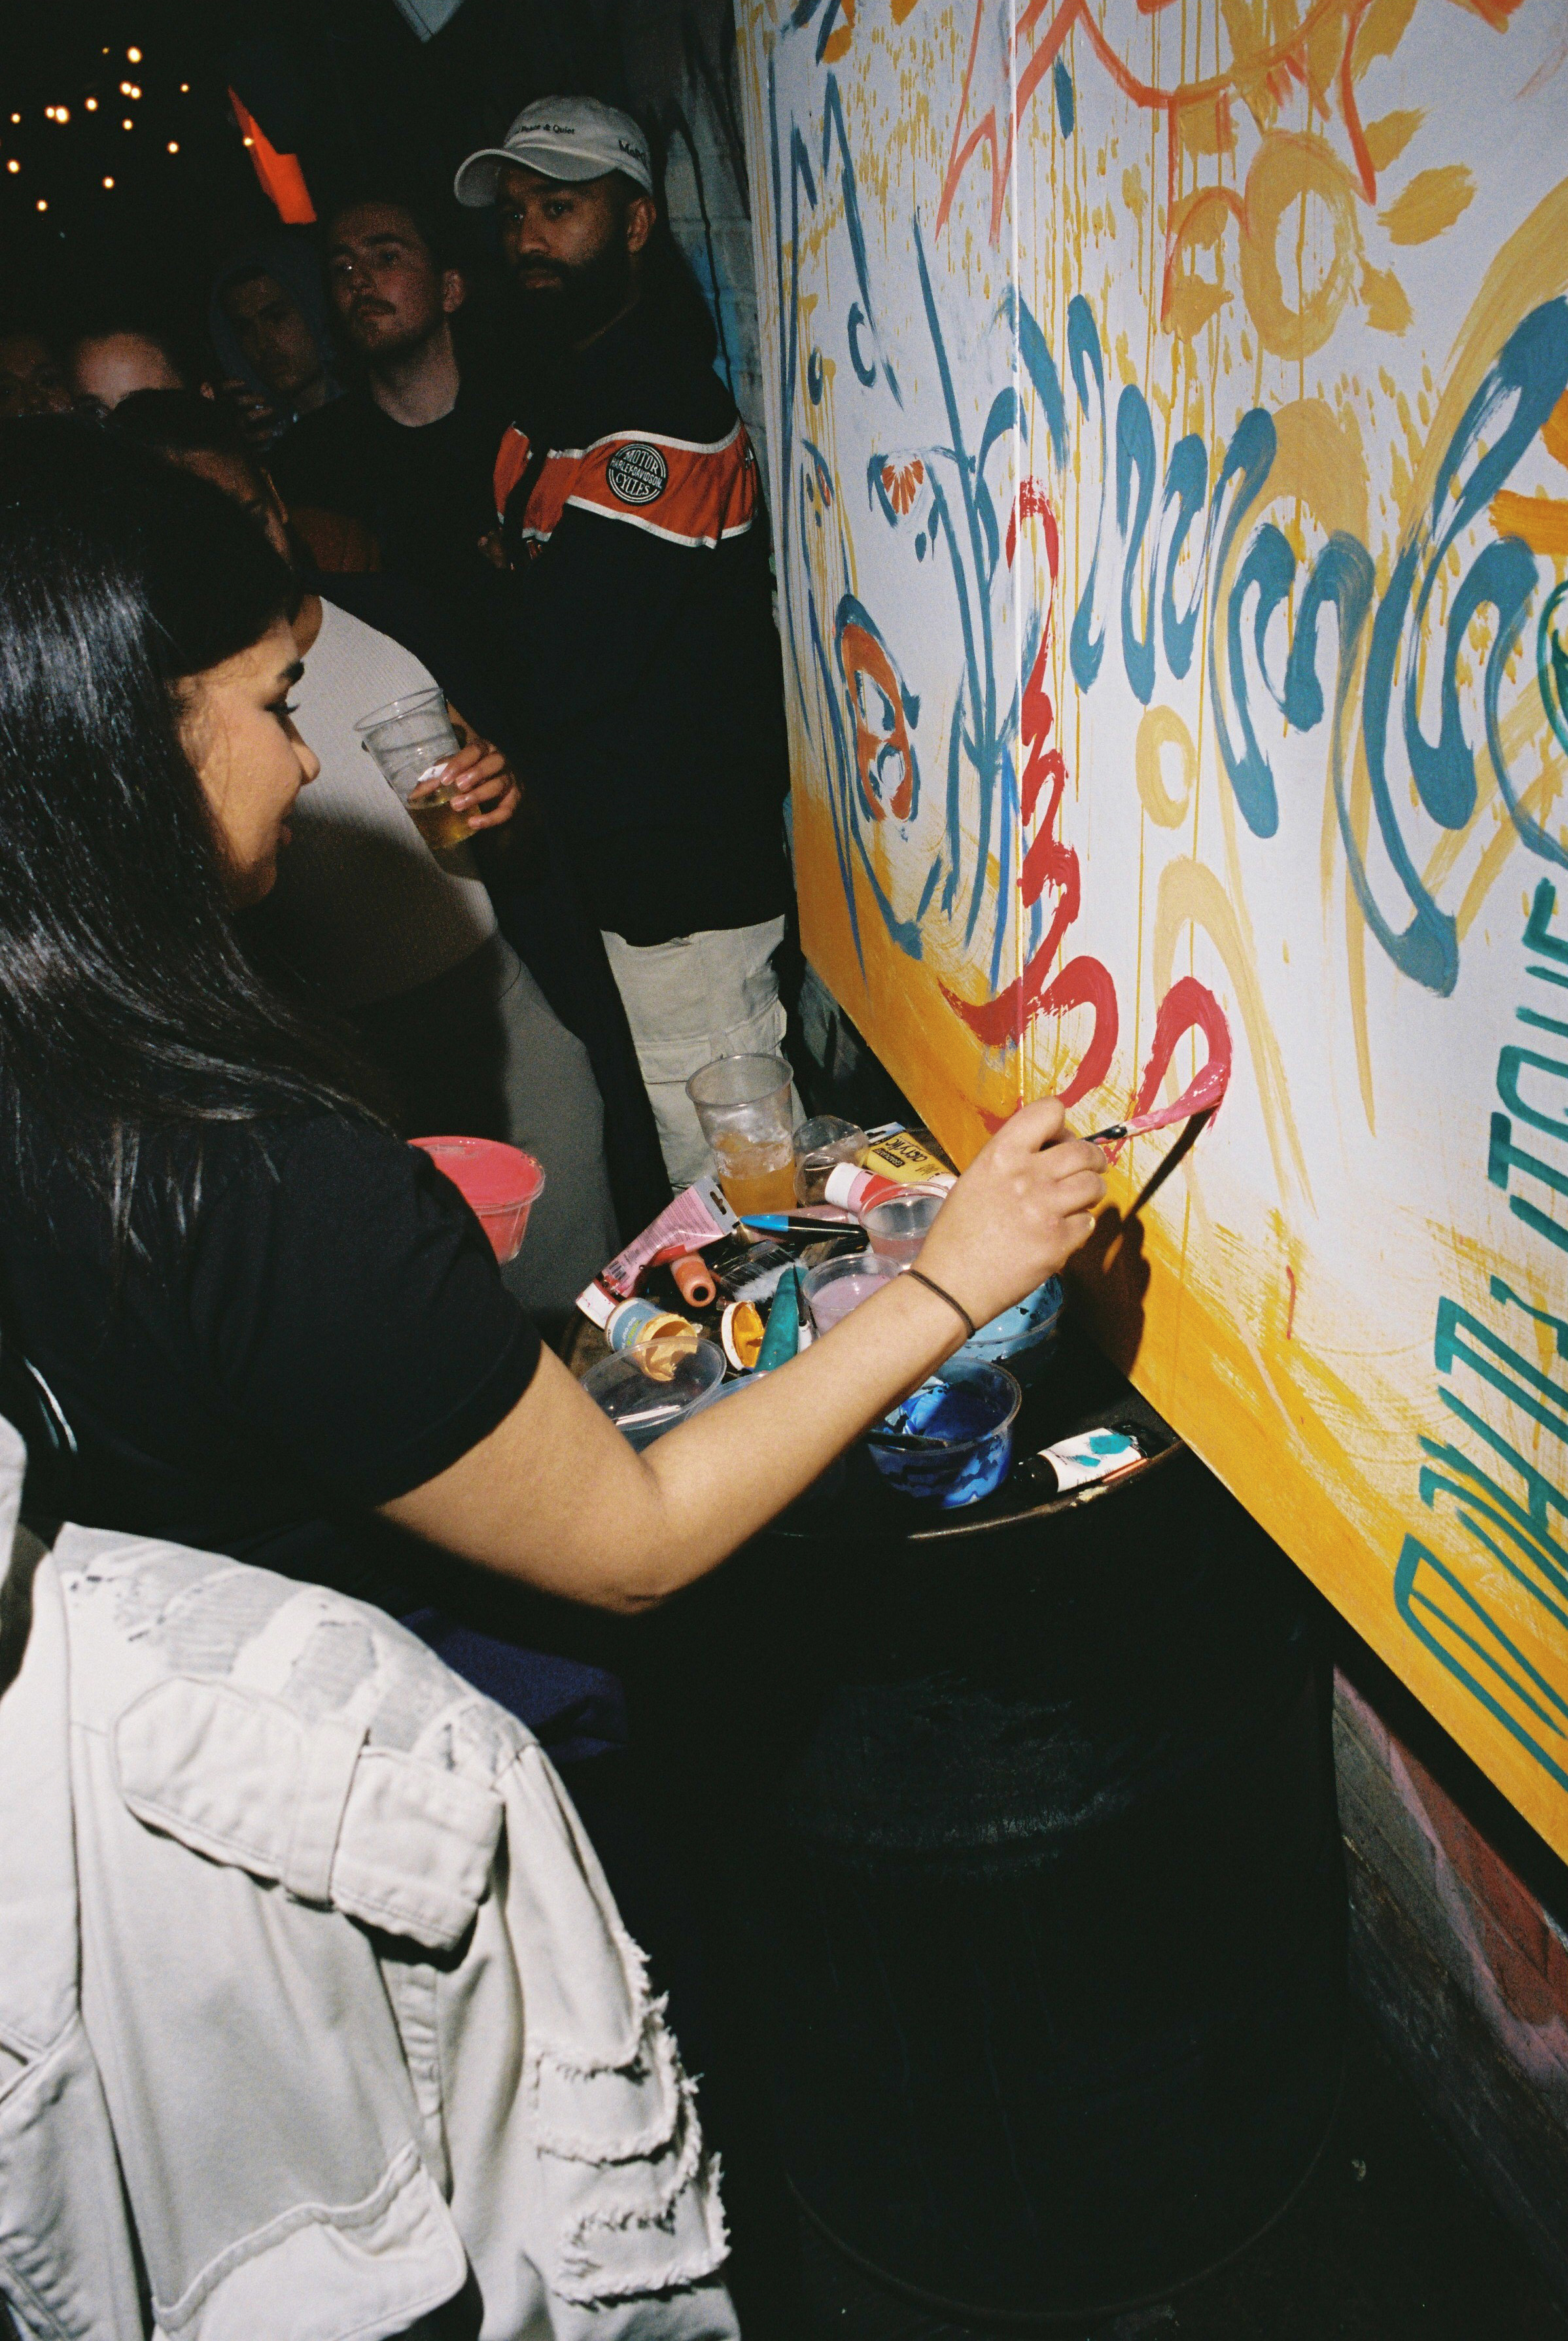 a girl painting on a wall at da collective event in london